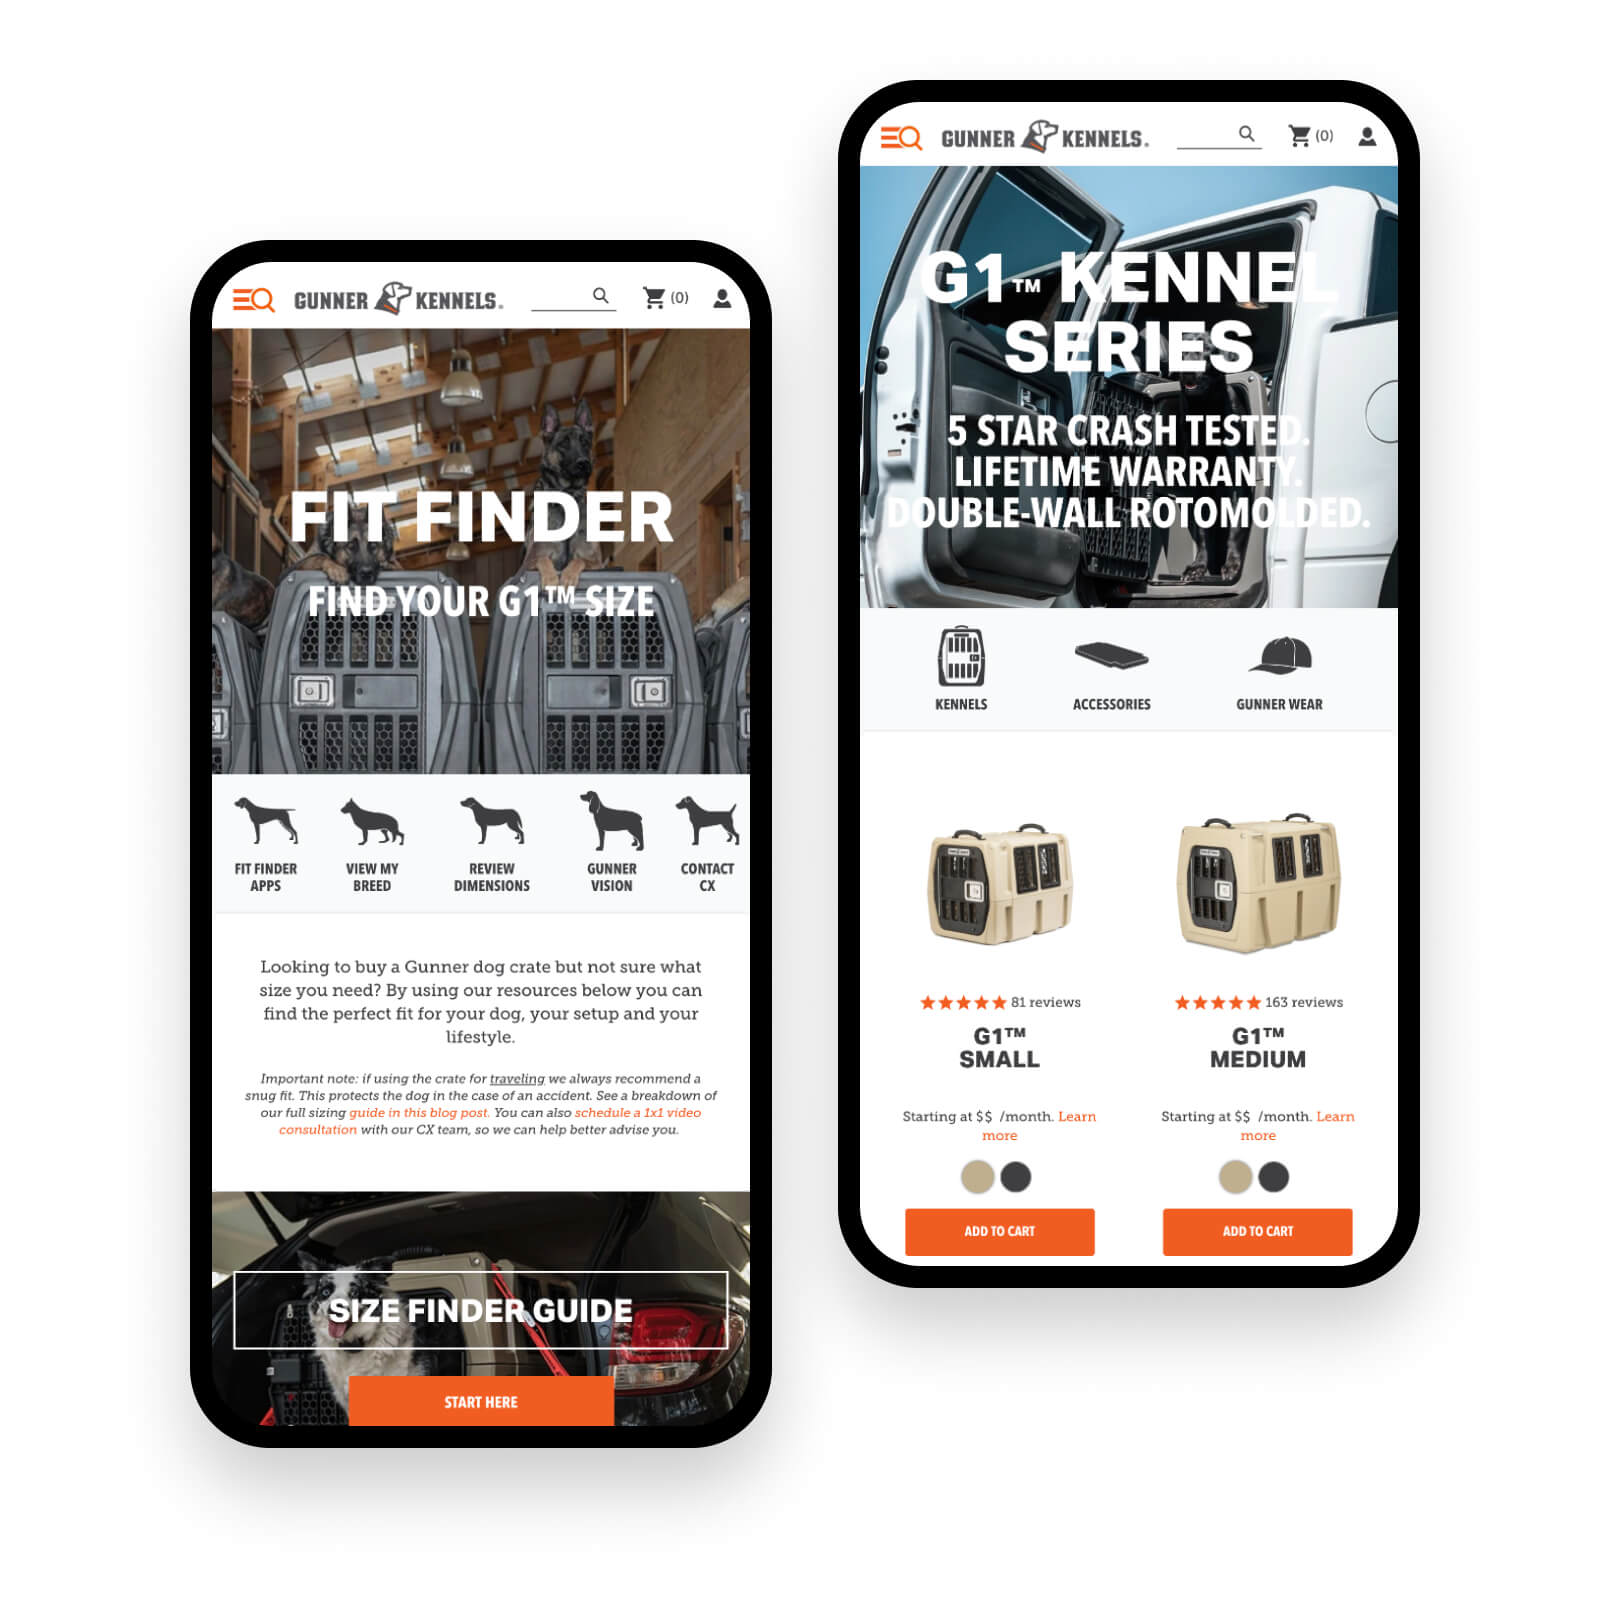 The Gunner Kennels online store displayed on two mobile devices.